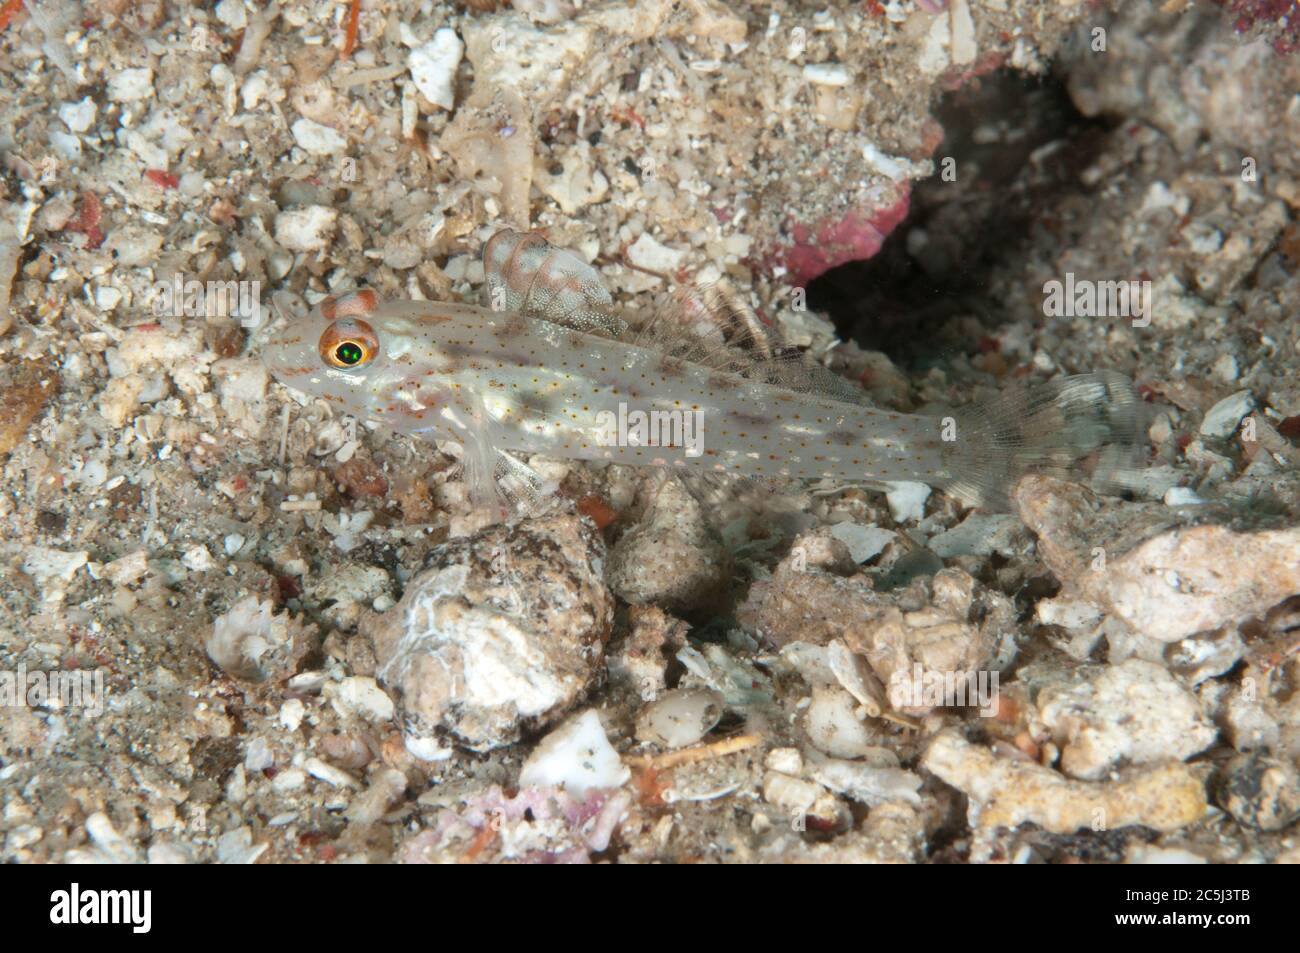 Signalfin Goby, Coryphopterus signipinnis, on sand, Pulau Putus dive site, Lembeh Straits, Sulawesi, Indonesia Stock Photo